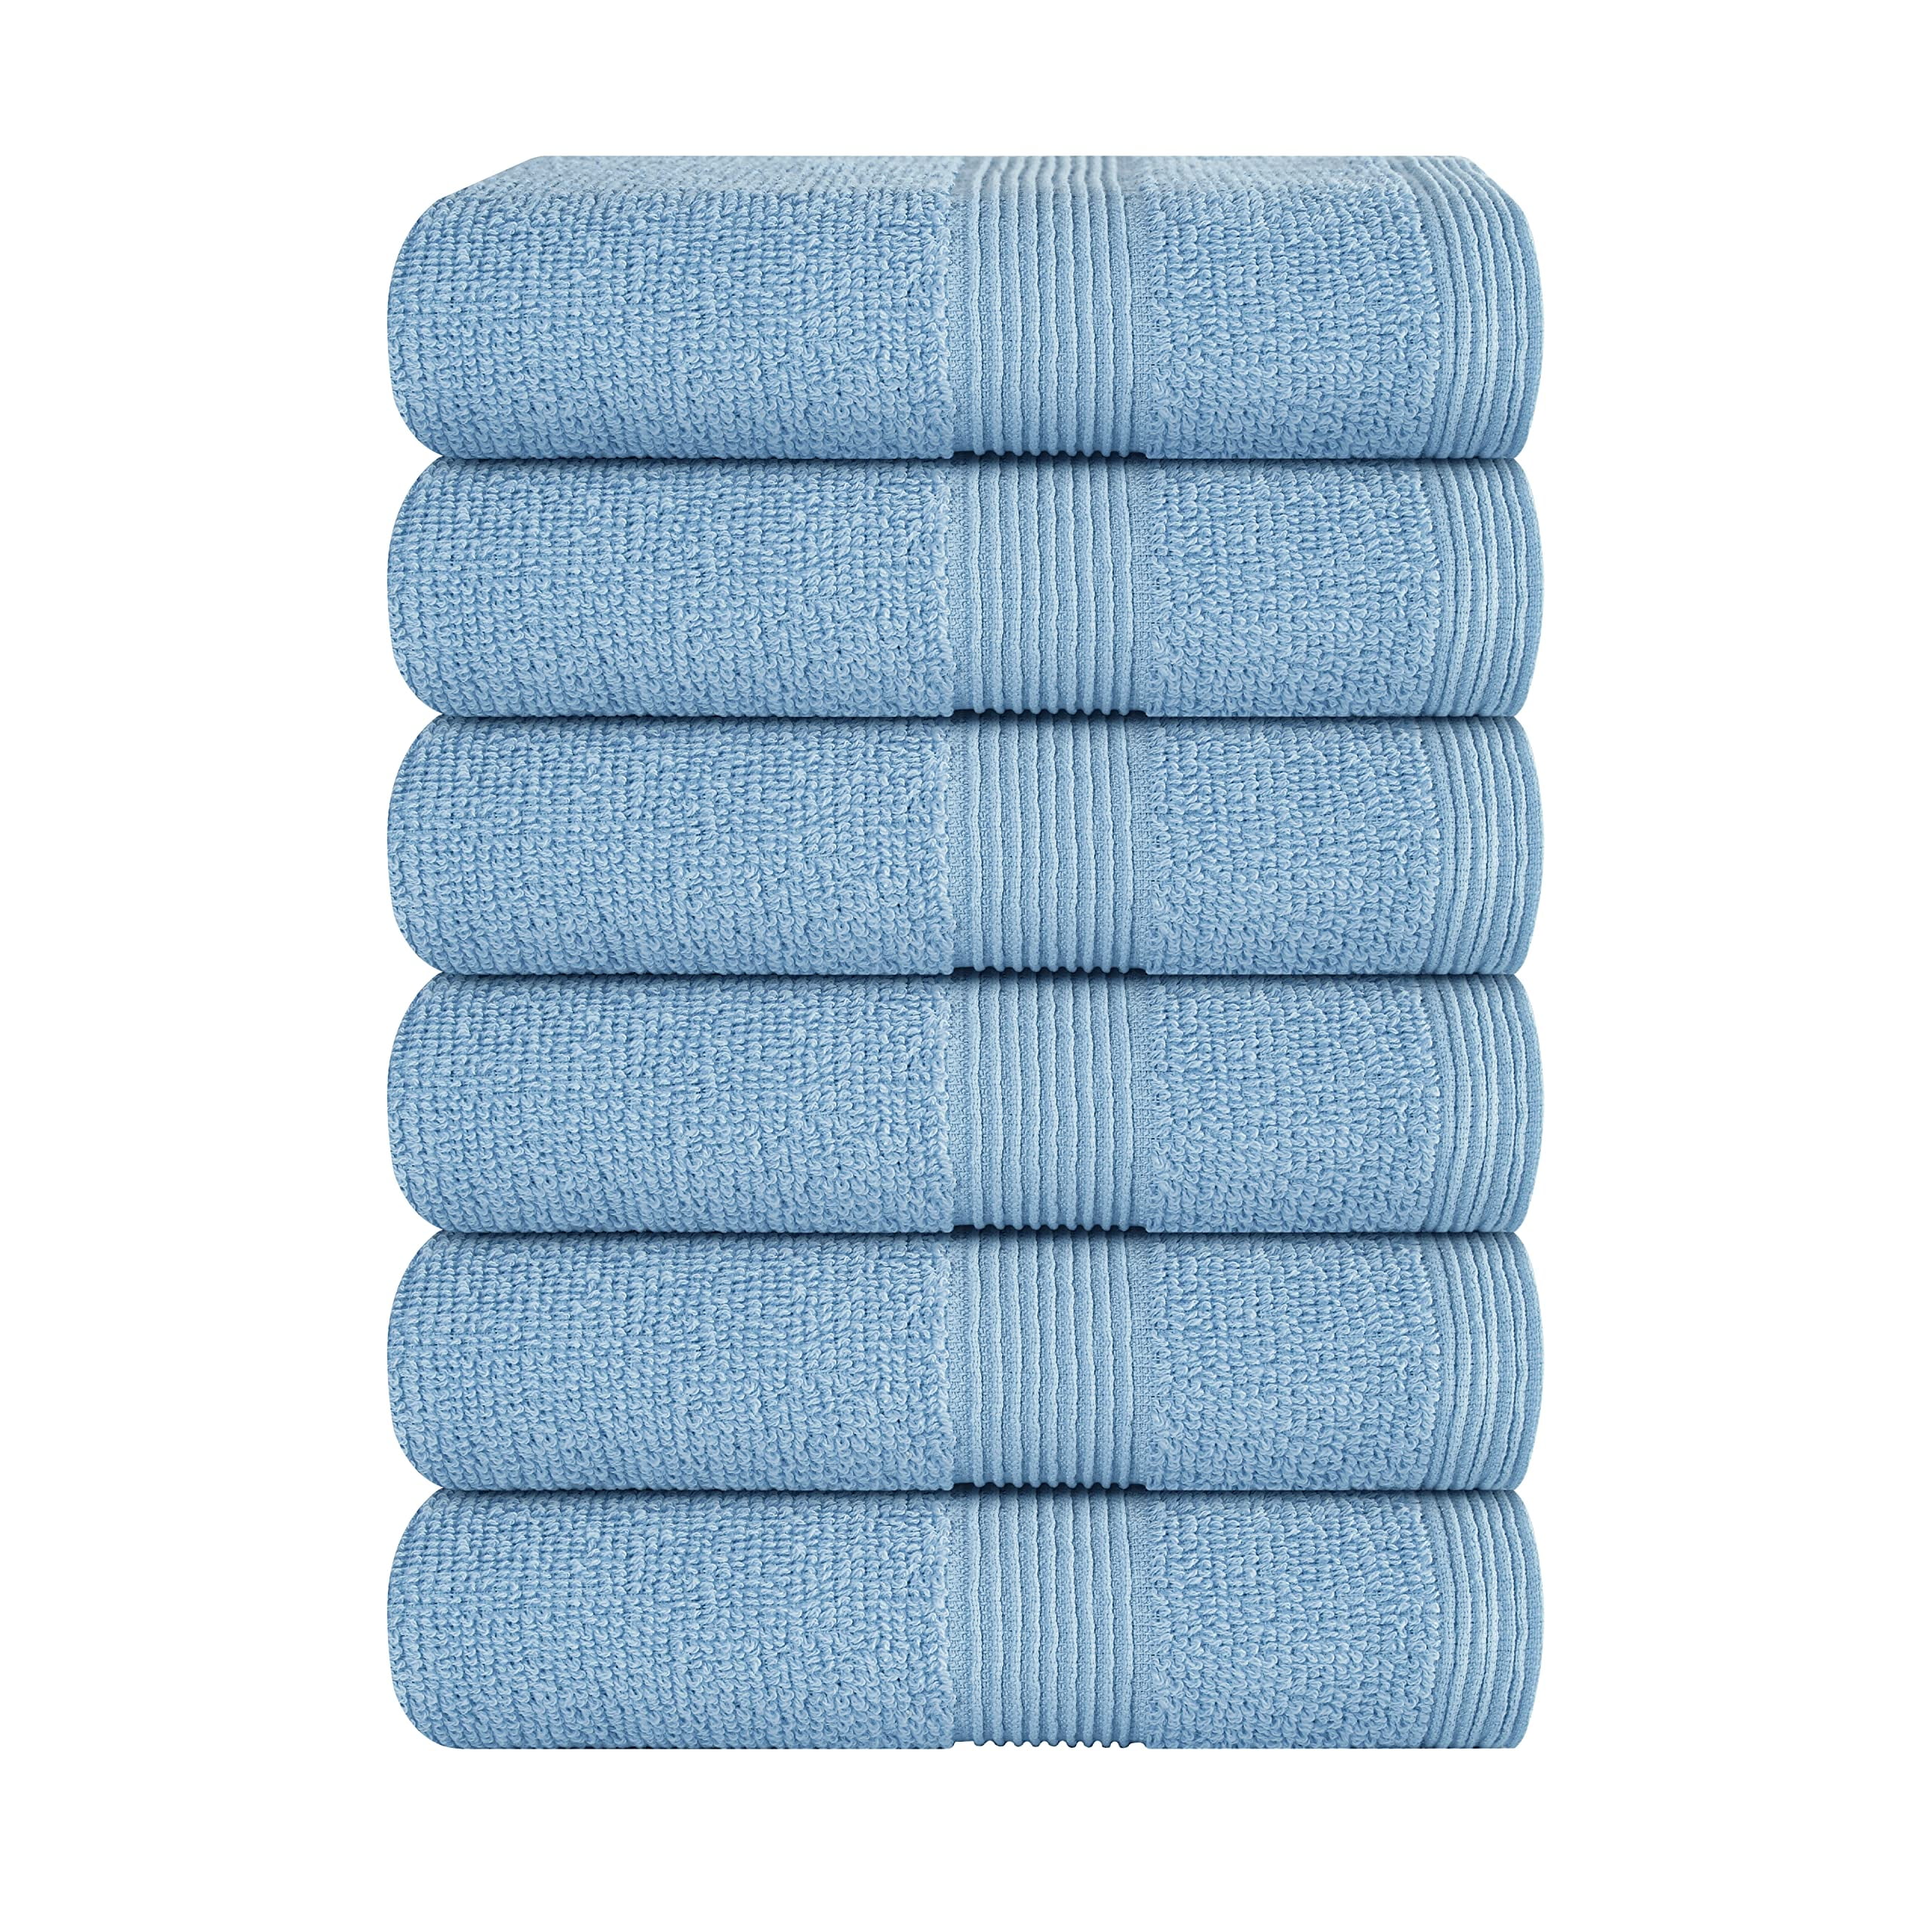 Cotton Craft - 6 Pack - Ultra Soft Extra Large Hand Towels 16x28 Light Blue  - 100% Pure Ringspun Cotton - Luxurious Rayon trim - Ideal for Daily Use 